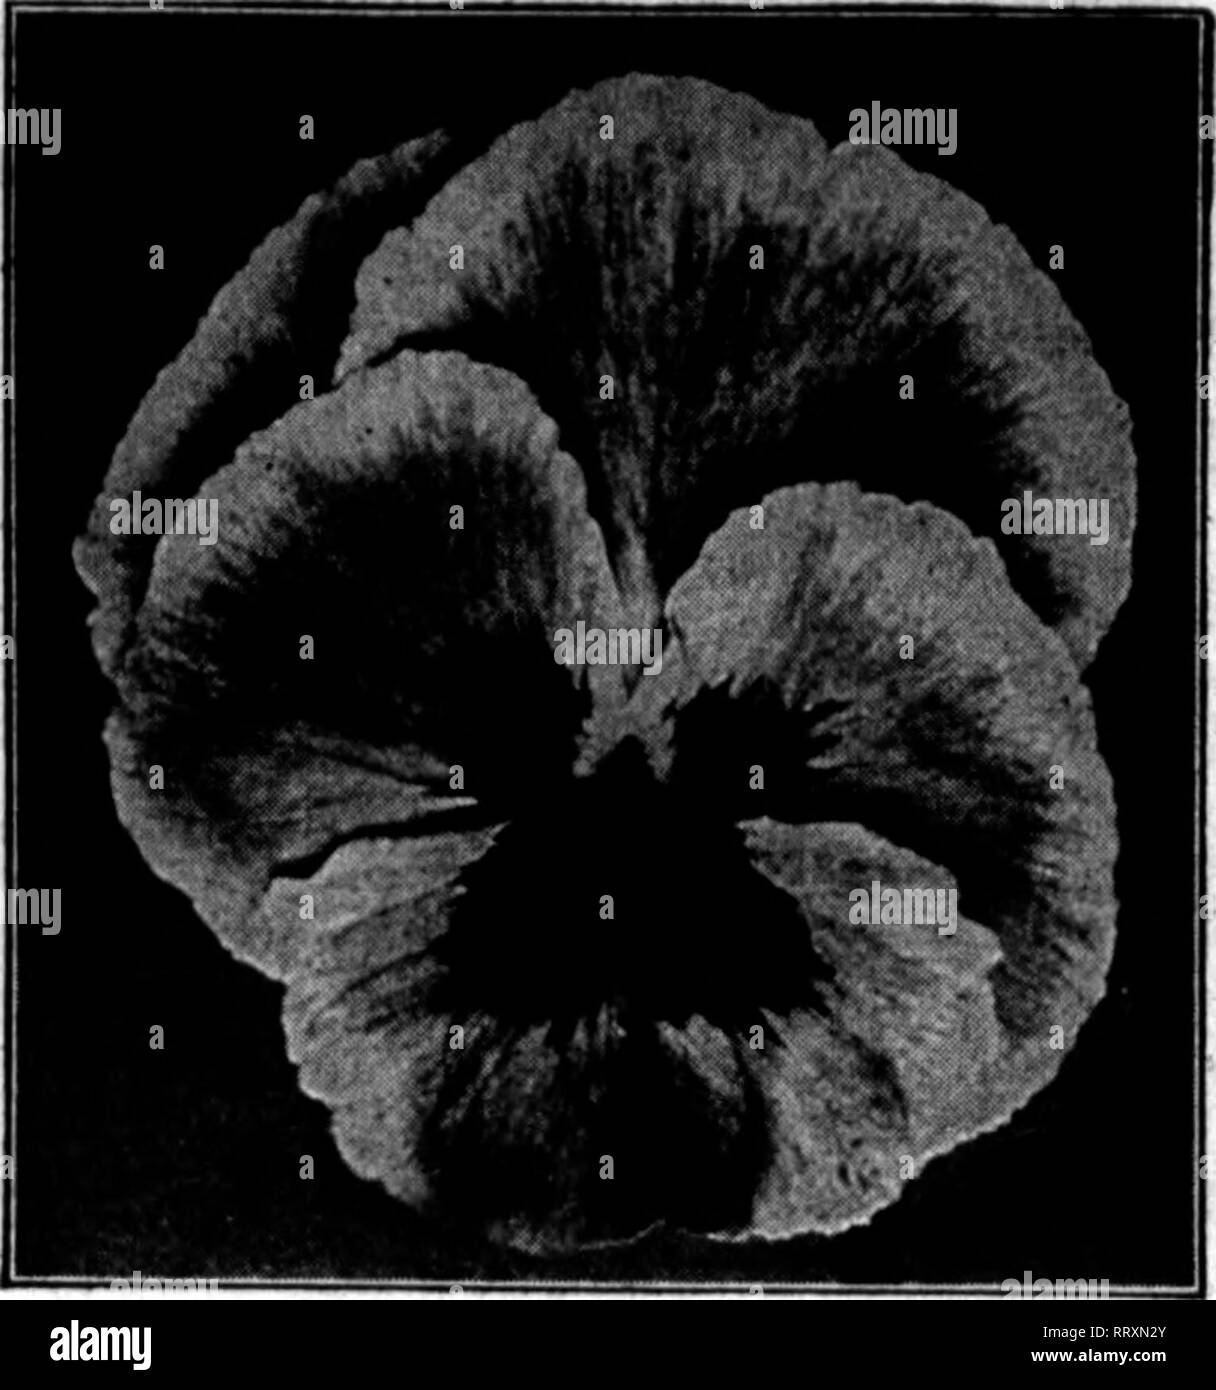 . Florists' review [microform]. Floriculture. V&gt;^'-: The Florists^ Review Jdlx 3, 1918.. Stokes' Standard Mixed Pansy The finest strain of Giant Pansies it is possible to produce. Is a blend of all the finest varieties from France, England and Germany. Trade fkt (2000 seeds), SOc; J^ n., 7Sc; GIANTS Tr. pkt. Oz. Bamot'B Blotched ..$0.60 $4.00 Gassier Oianto 40 3.60 Giant Trlmardeau 80 1.26 Orchid-flowered, very Ugbt 60 4.00 KnKlUh Larve-flowering 26 1.00 Fine Mixed 16 .60 Giant Adonla 36 2.00 Giant Lord Beaconsfield 36 2.00 Giant £mperor %llliam 36 2.00 liL, $S.OO; ^ lb., $18.00 'A •!., $2 Stock Photo